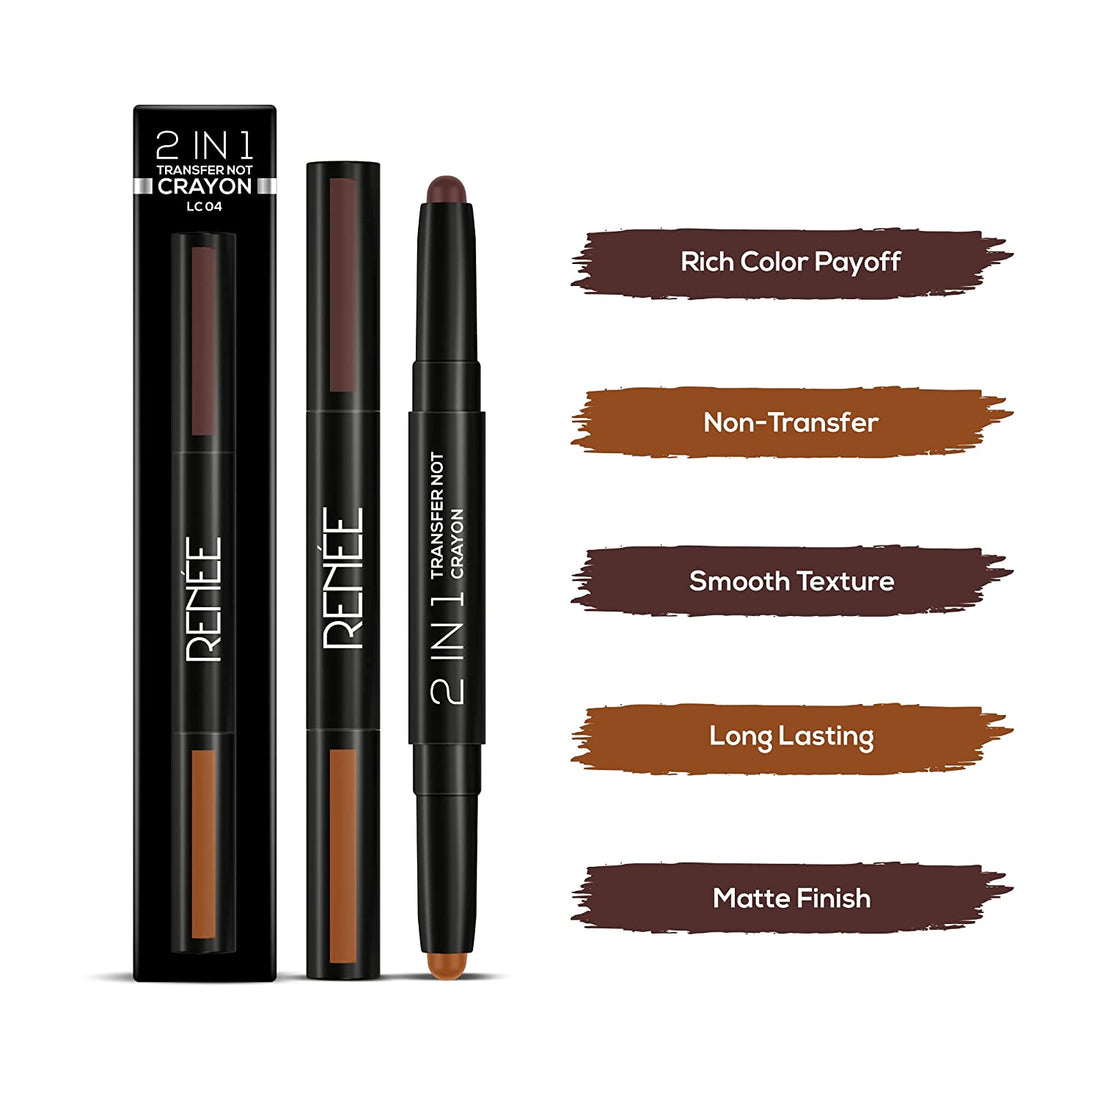 RENEE 2 in 1 Transfer Not Crayon, Long Lasting Smudgeproof Matte Lip Color with 2 Light & Dark Shades, Enriched with Shea Butter, LC 04 4gm